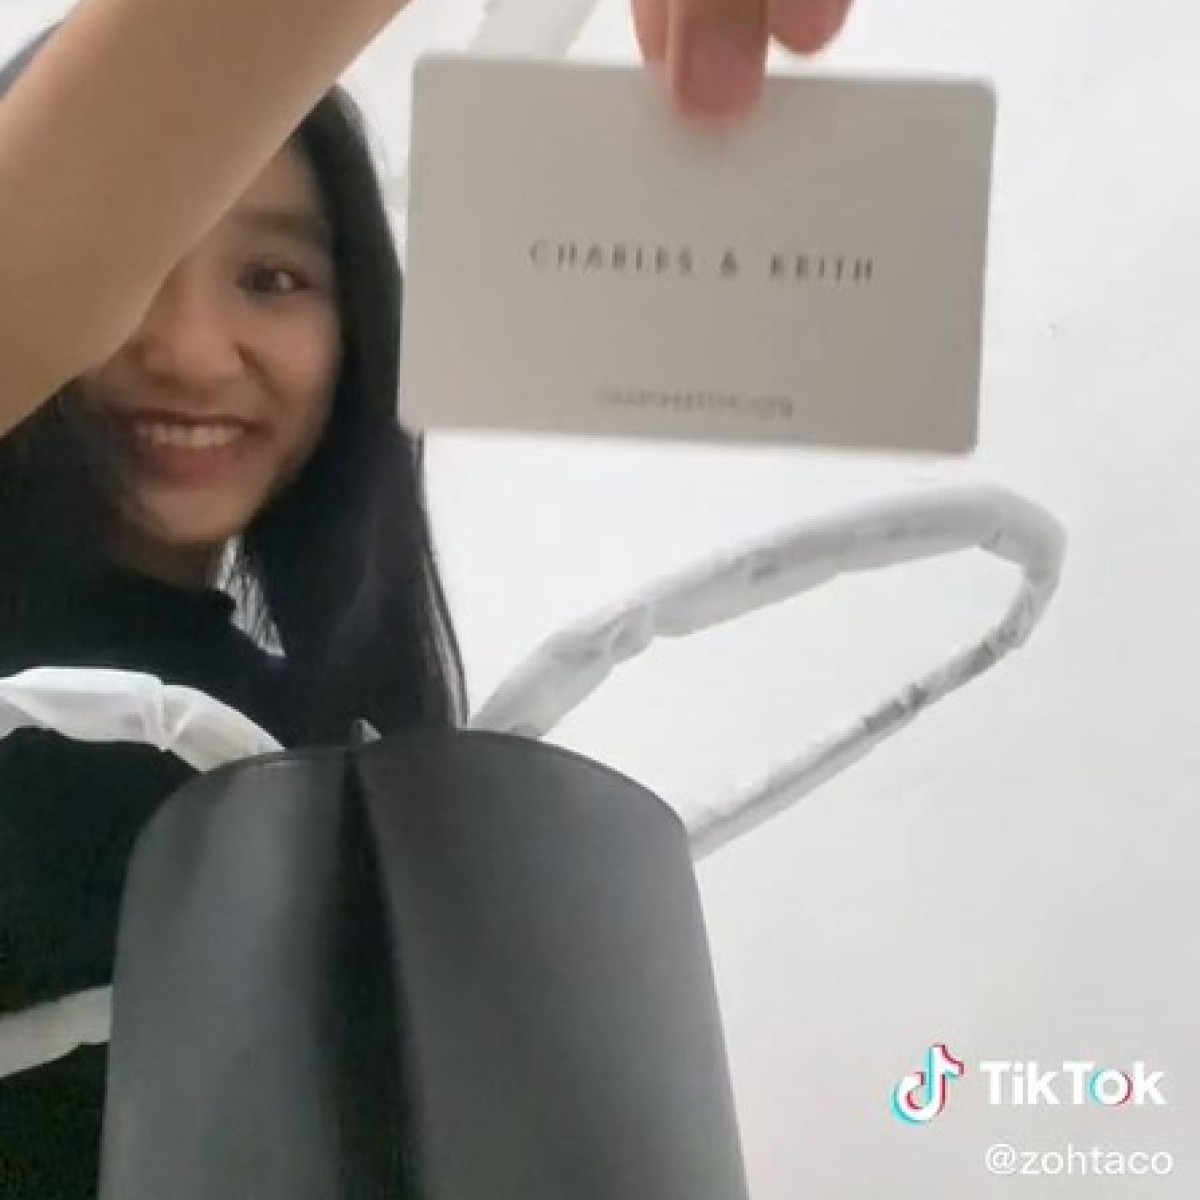 Mocked by netizens for calling Charles & Keith 'luxury' brand